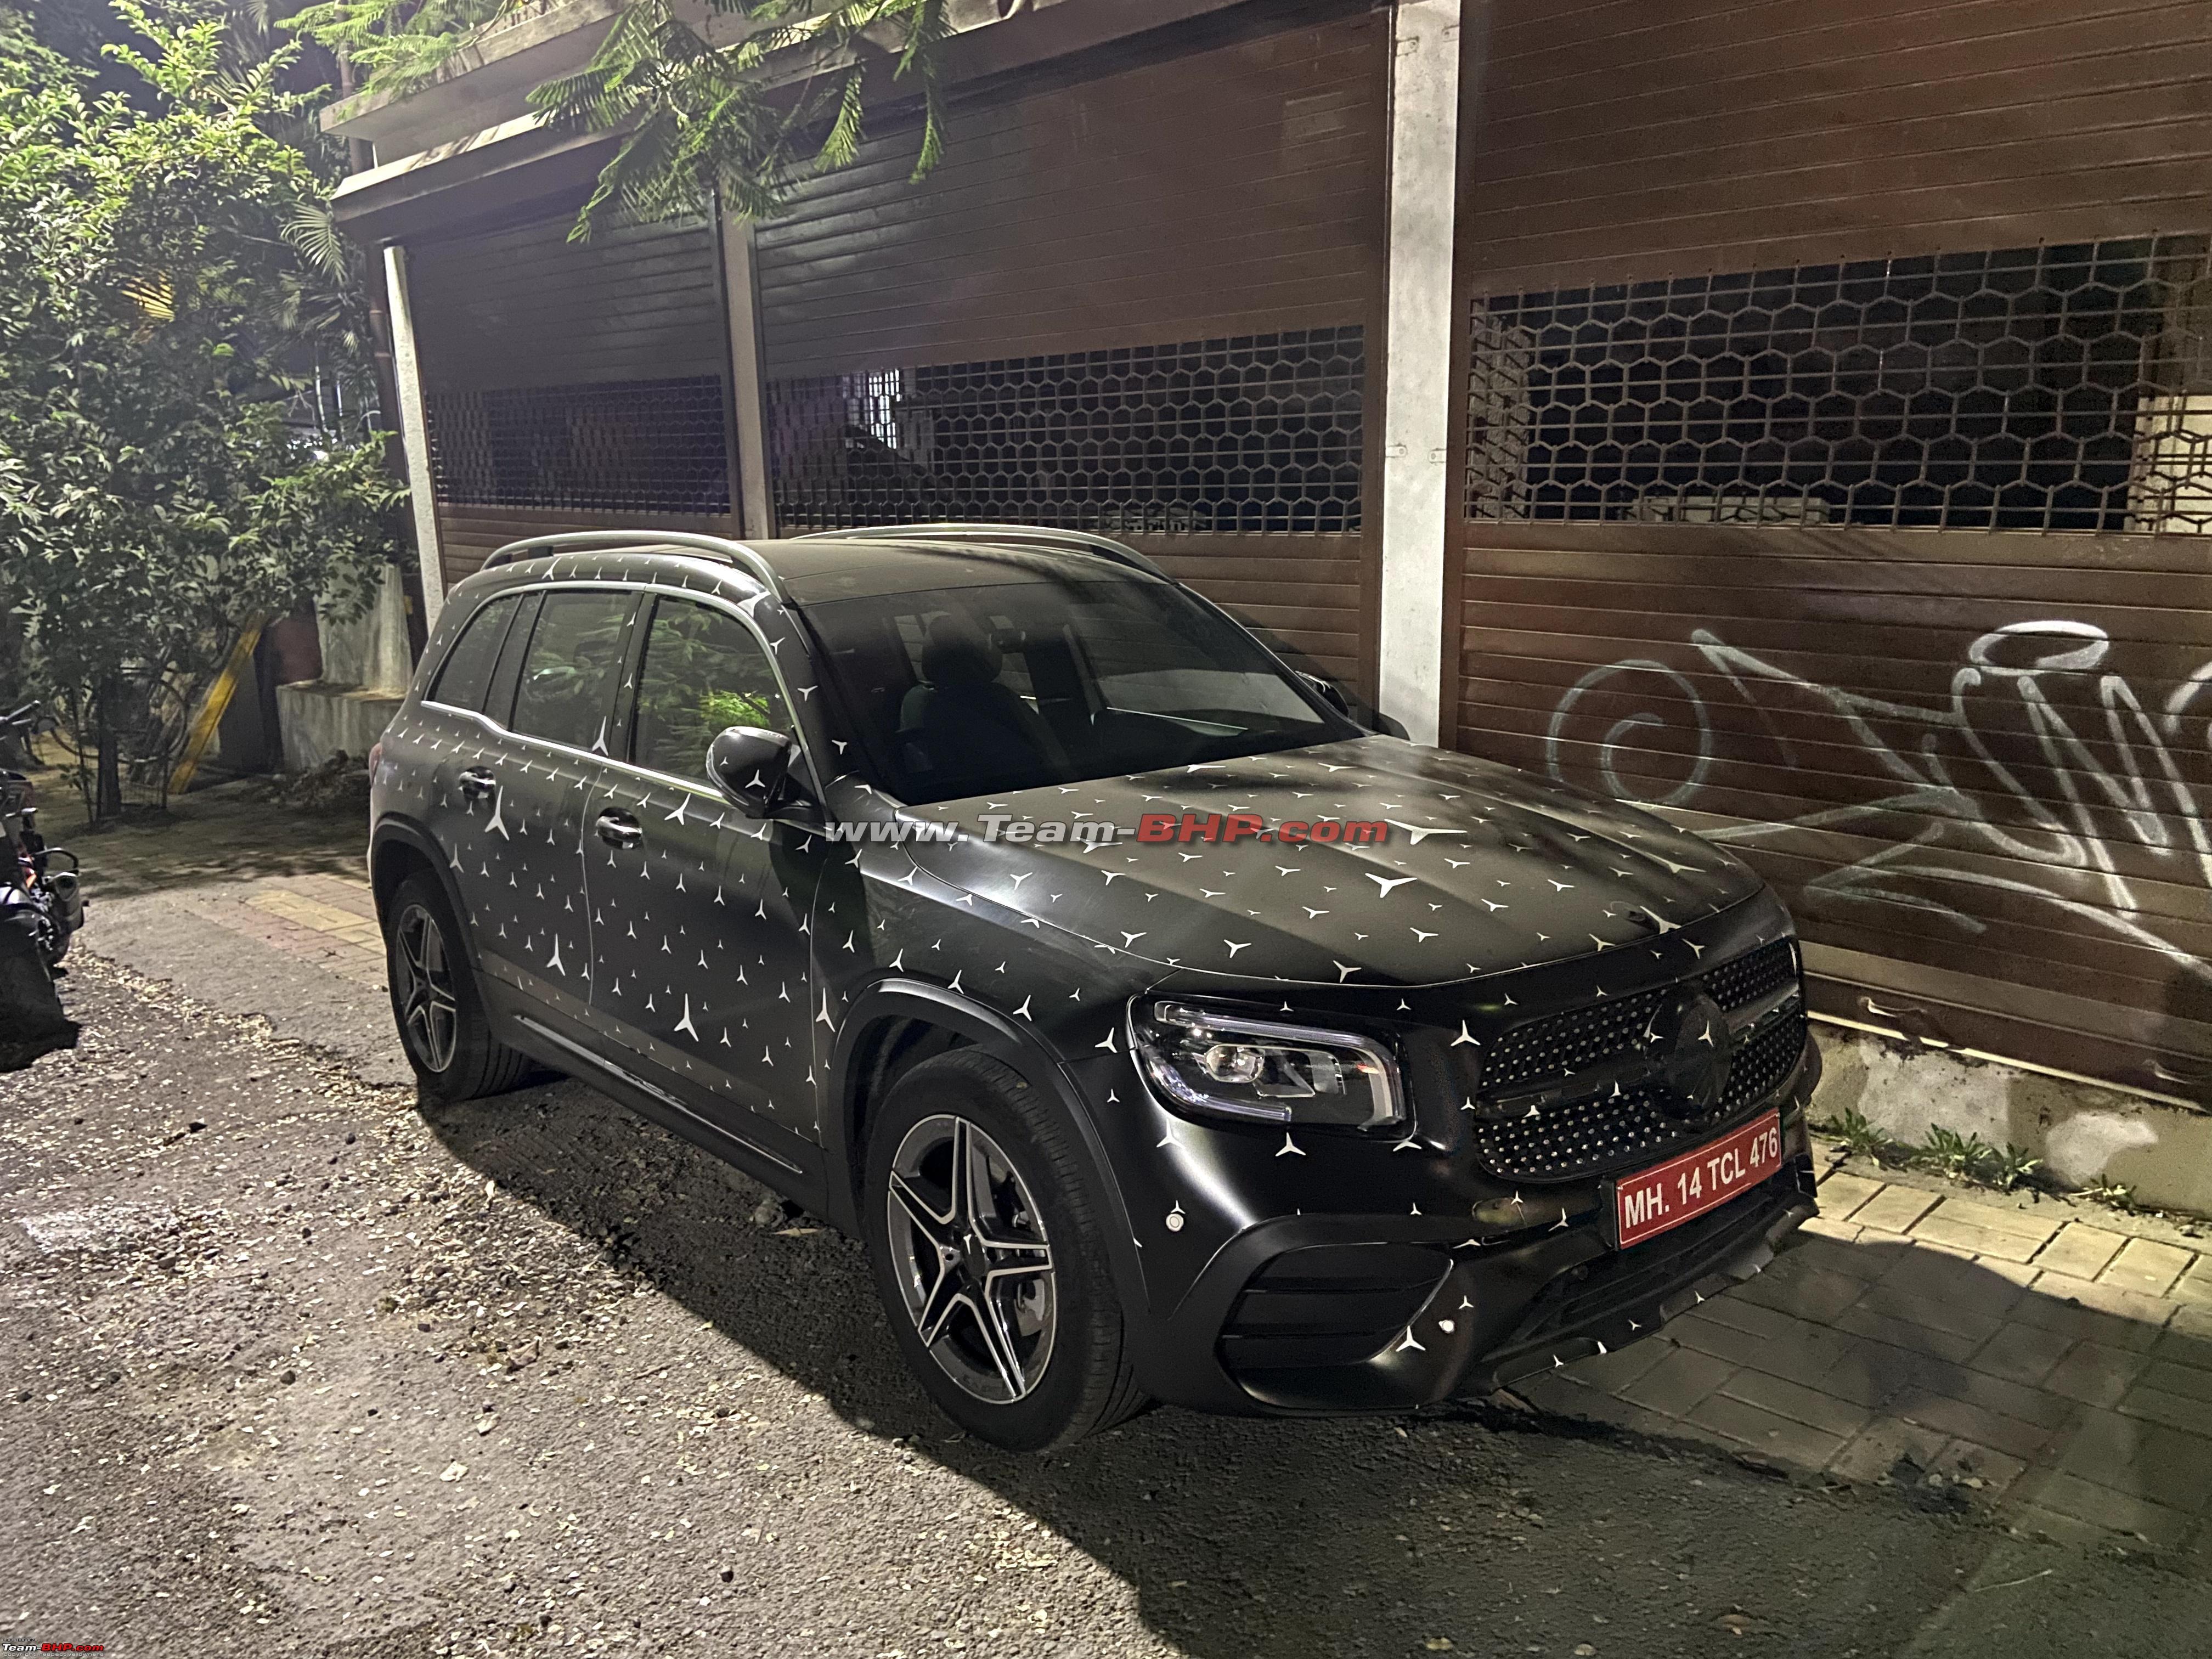 Mercedes-Benz GLB India launch in December 2022. EDIT: Drive